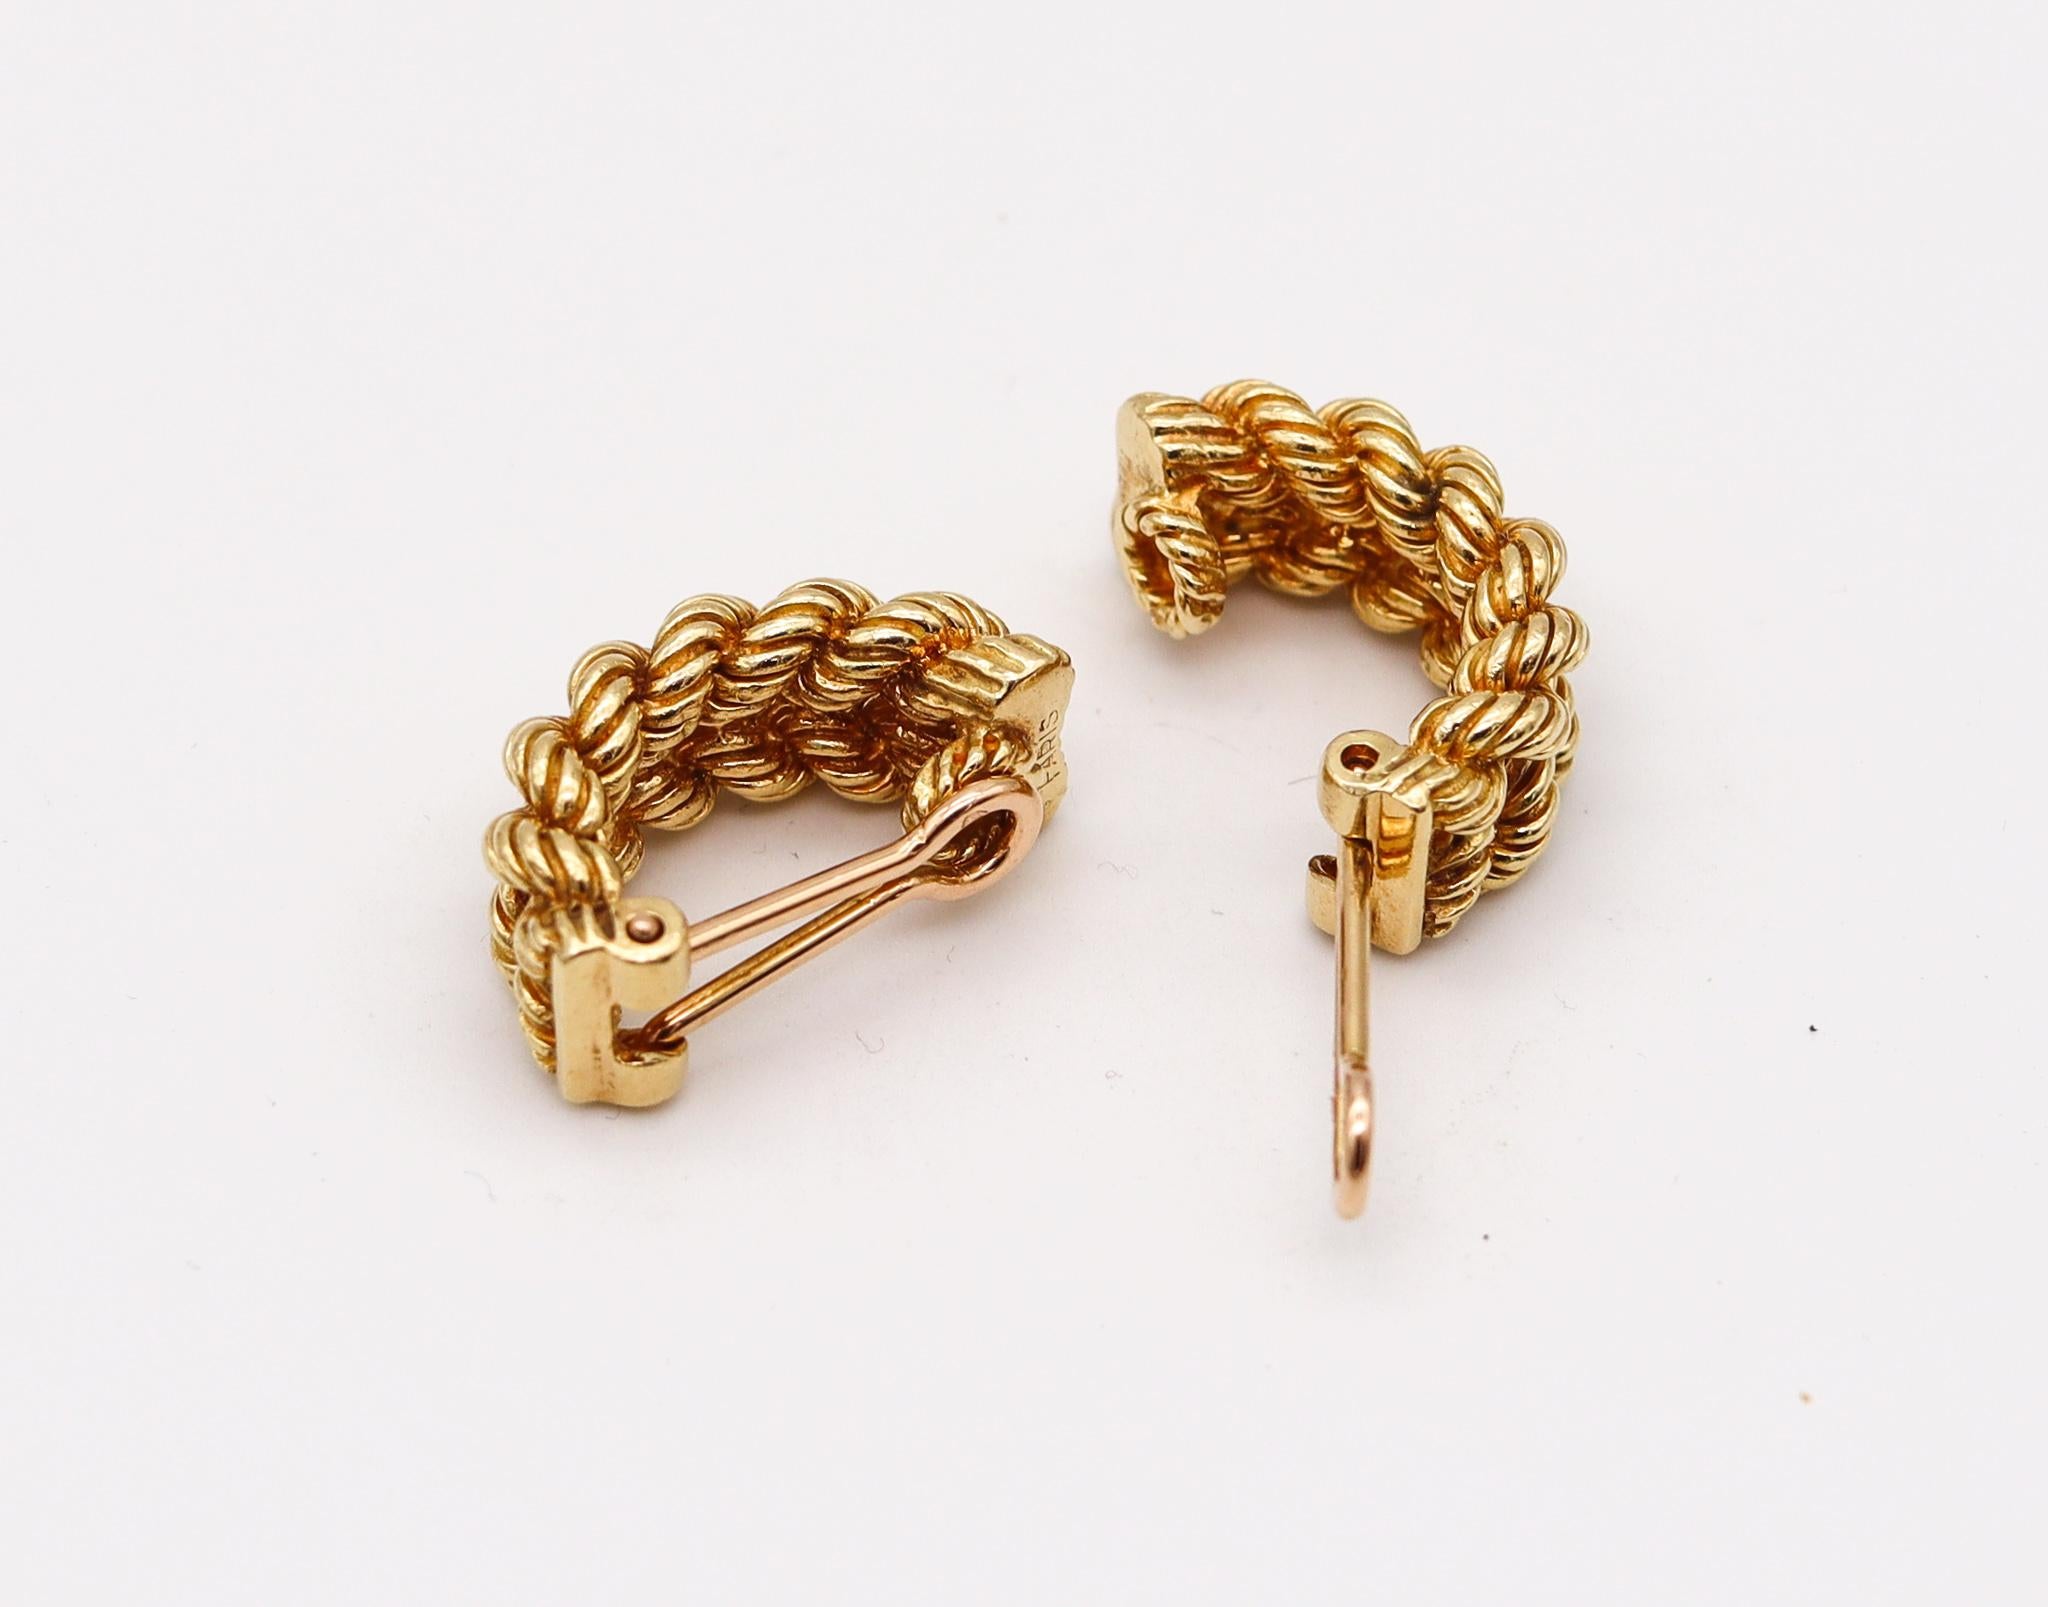 Hermes Paris 1970 Twisted Wires Clips on Earrings in Solid 18kt Yellow Gold In Excellent Condition For Sale In Miami, FL